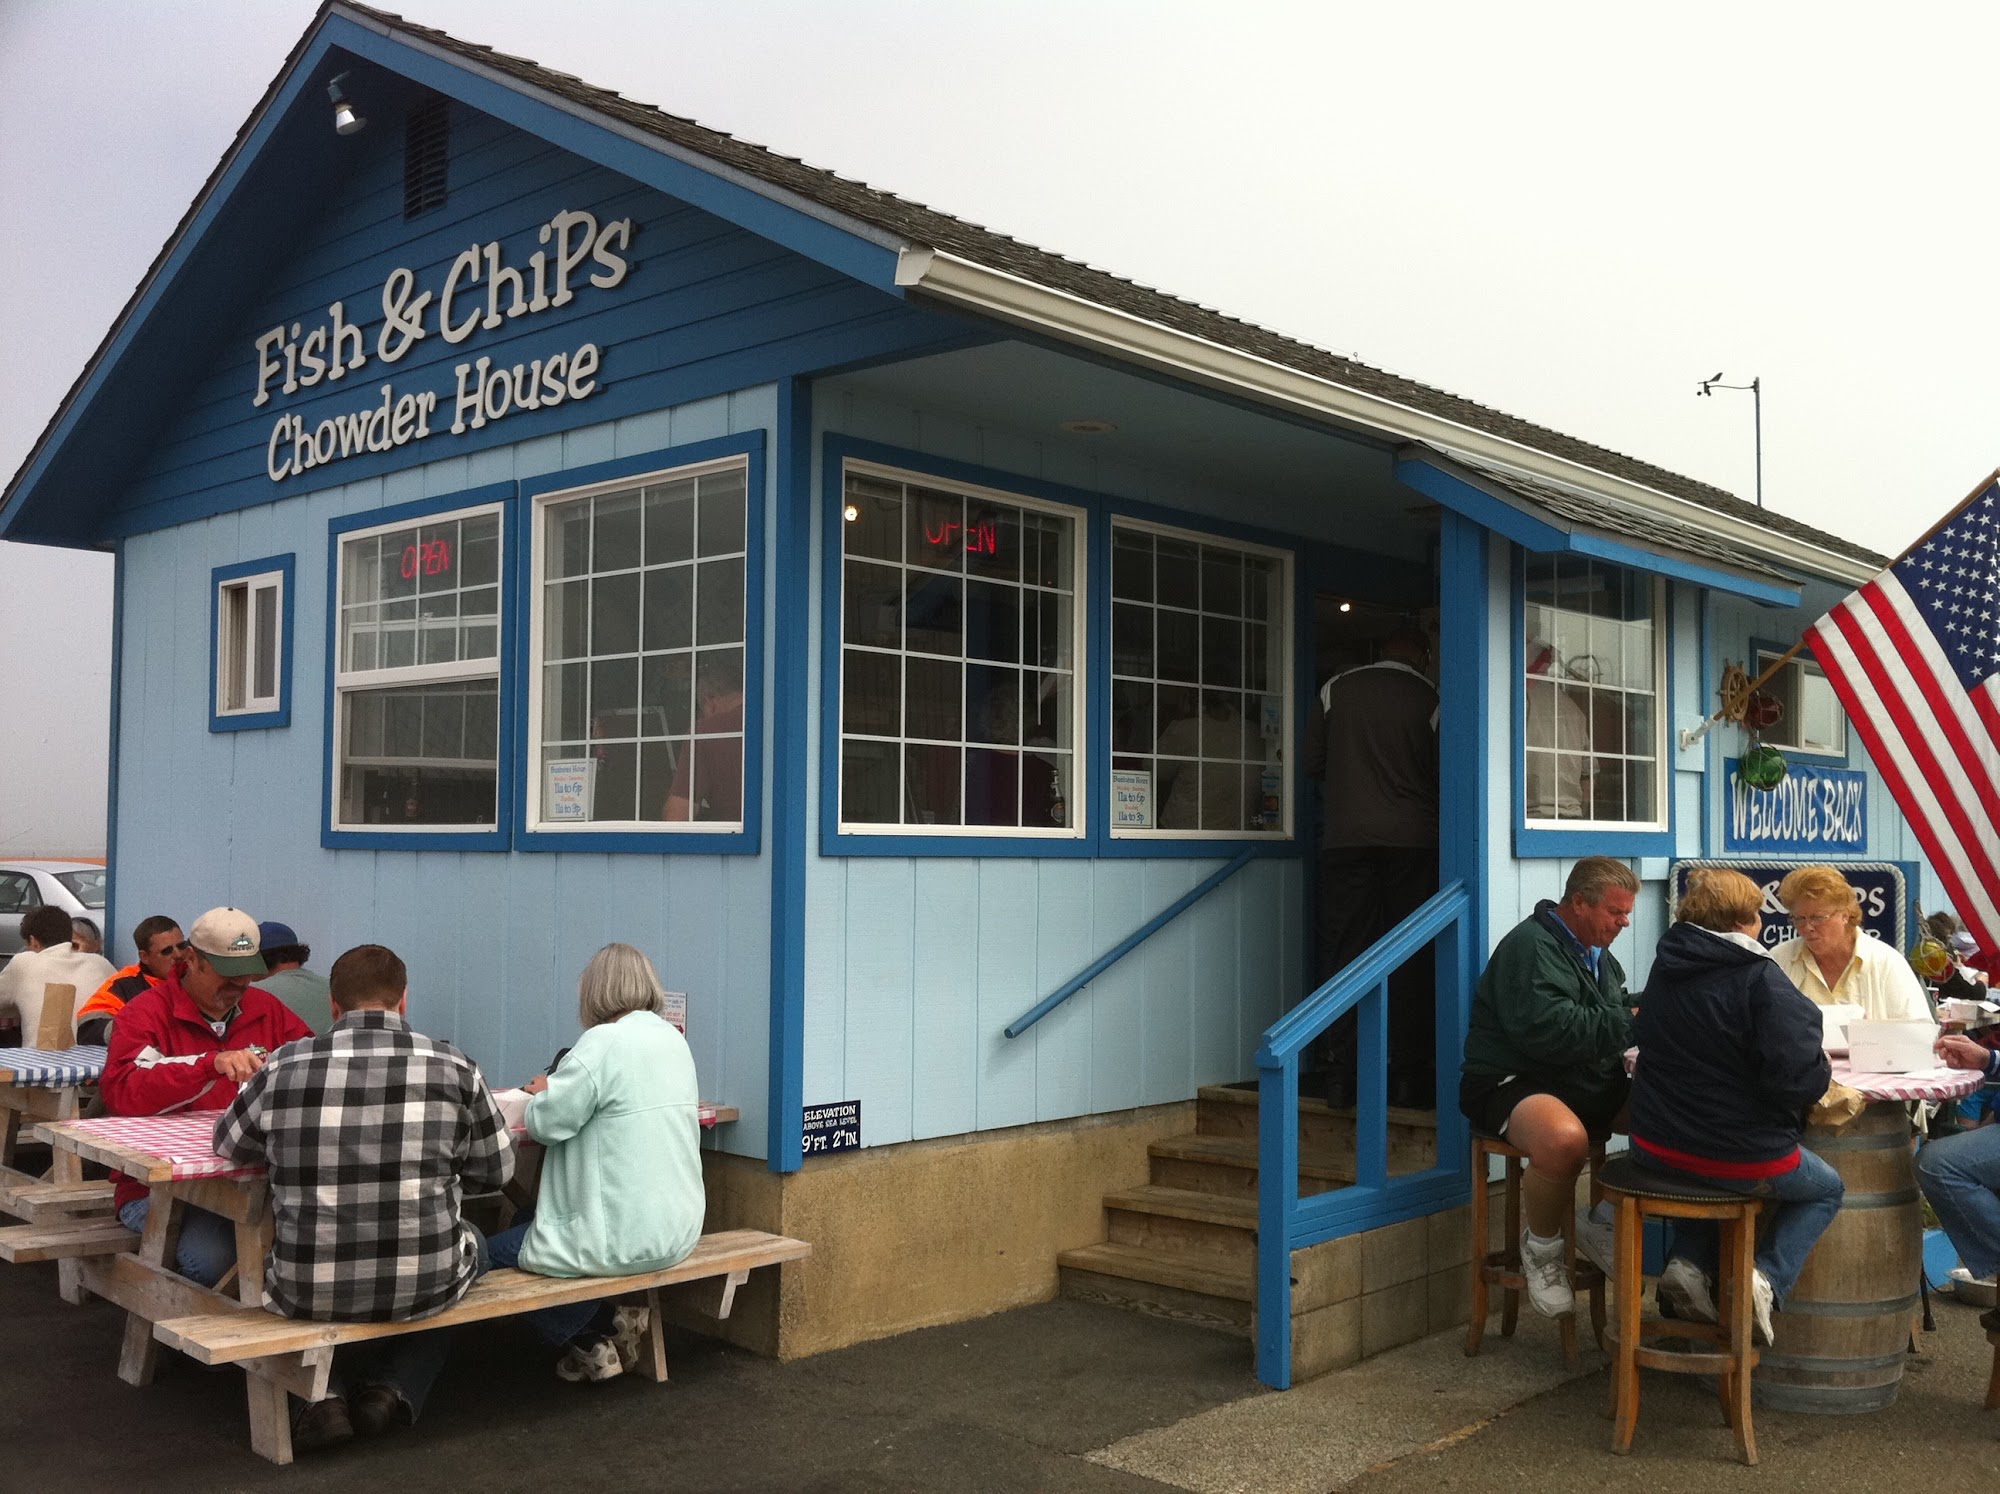 Fish & Chips Chowder House